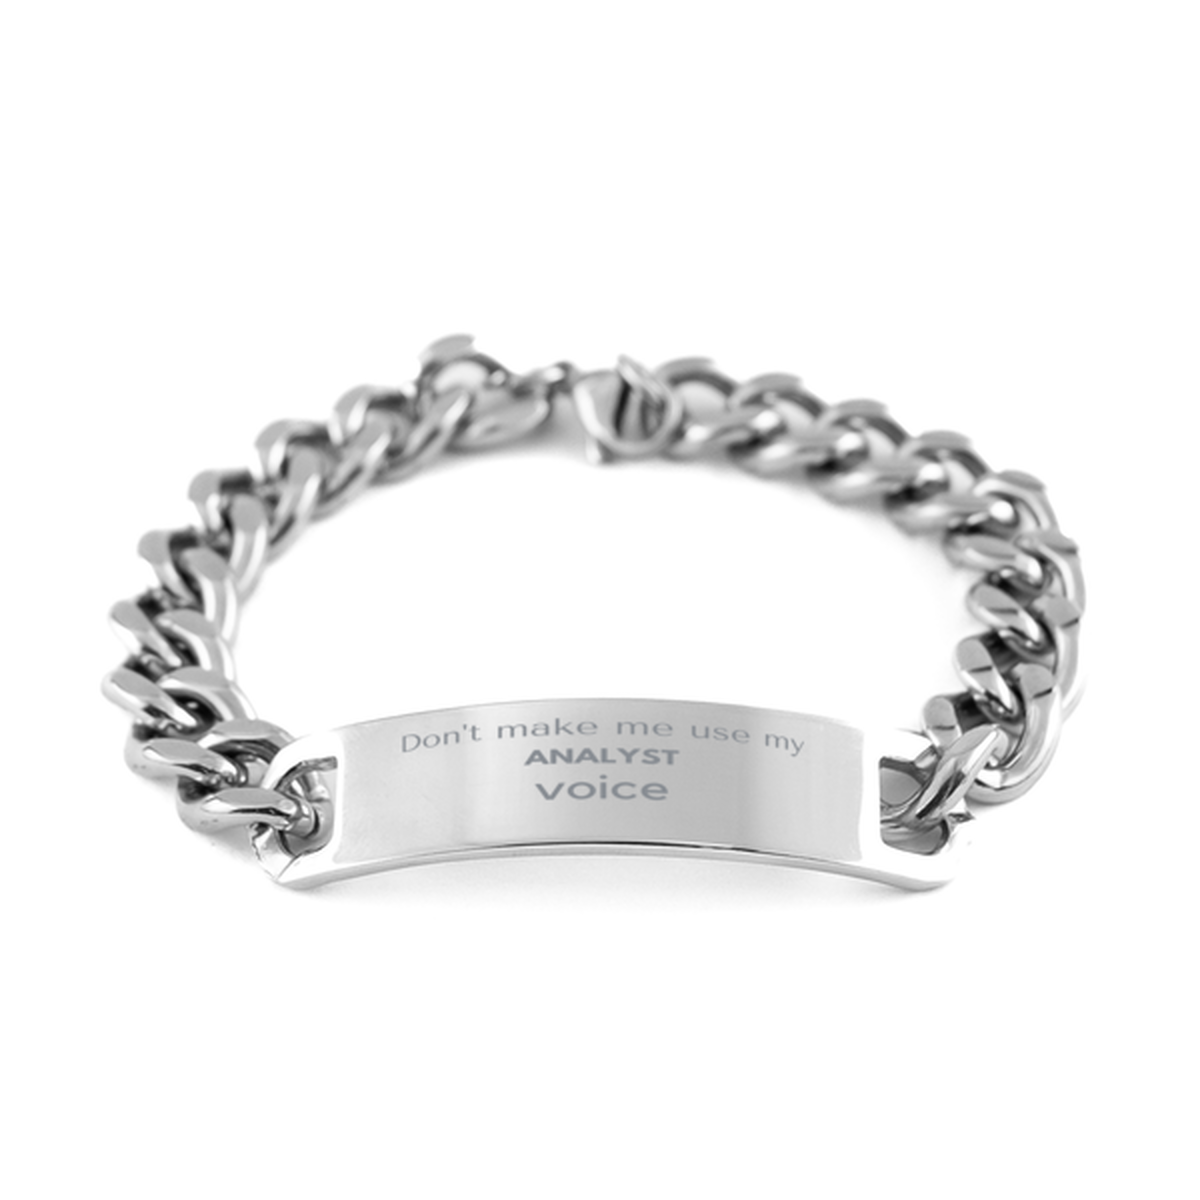 Don't make me use my Analyst voice, Sarcasm Analyst Gifts, Christmas Analyst Cuban Chain Stainless Steel Bracelet Birthday Unique Gifts For Analyst Coworkers, Men, Women, Colleague, Friends